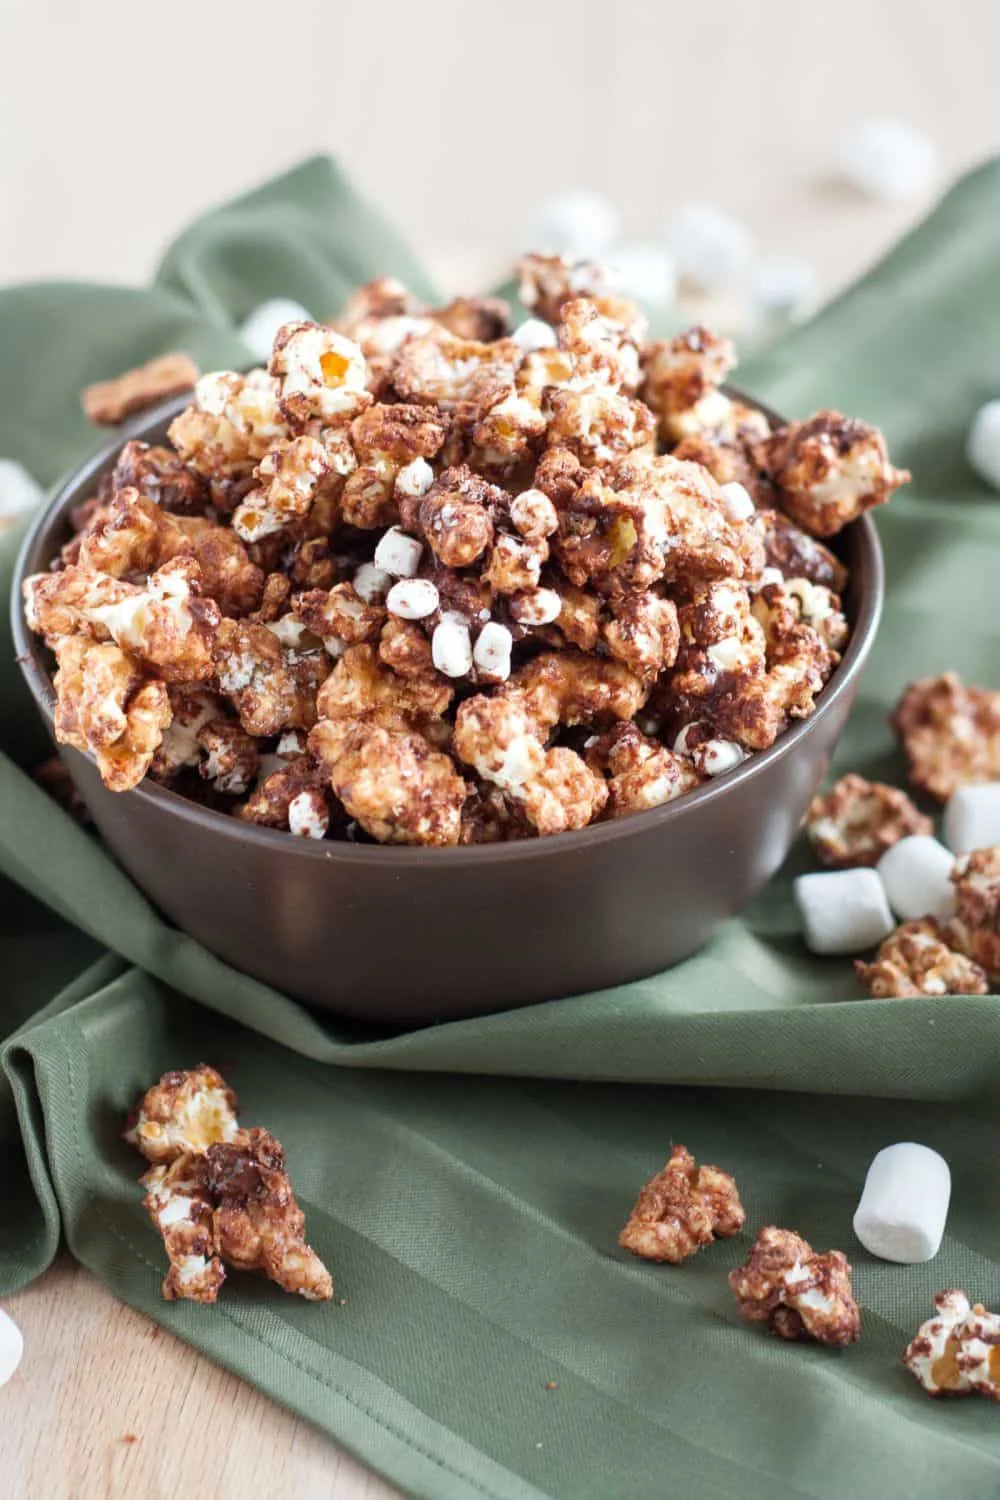 Crunchy s'mores caramel corn is an addicting snack that's perfect year-round!